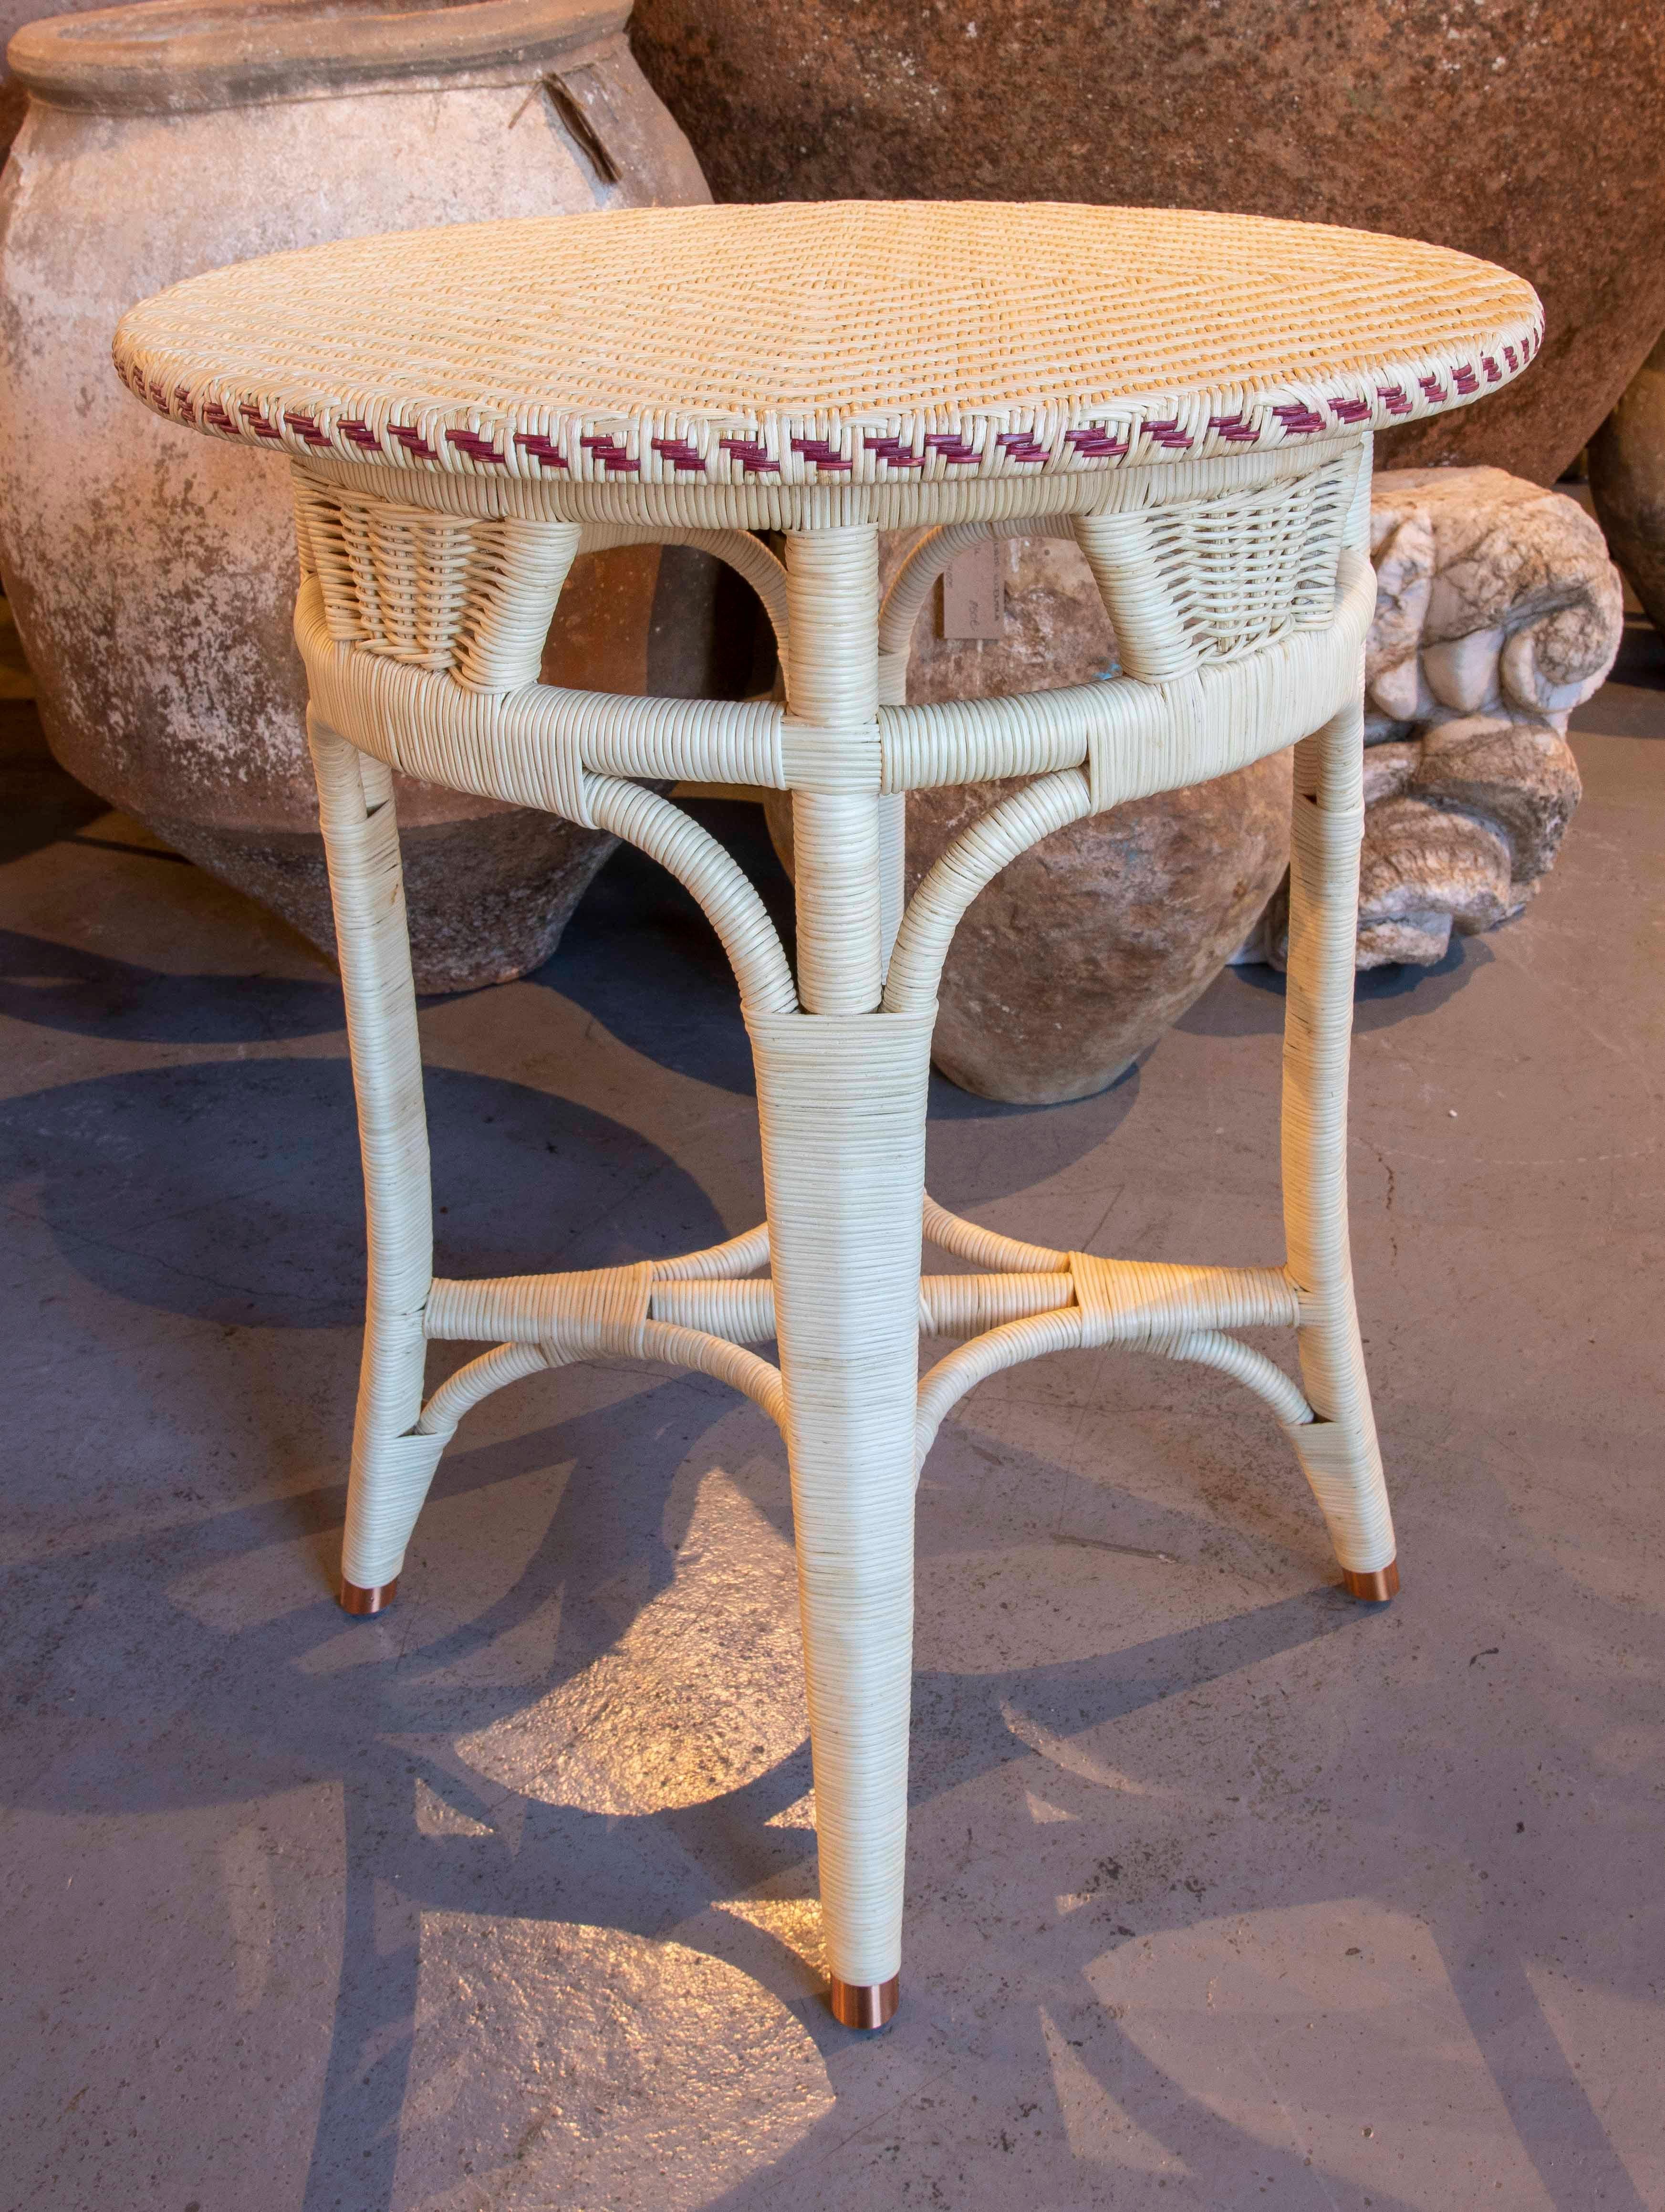 Handmade Round Wicker Side Table with Leather Border 